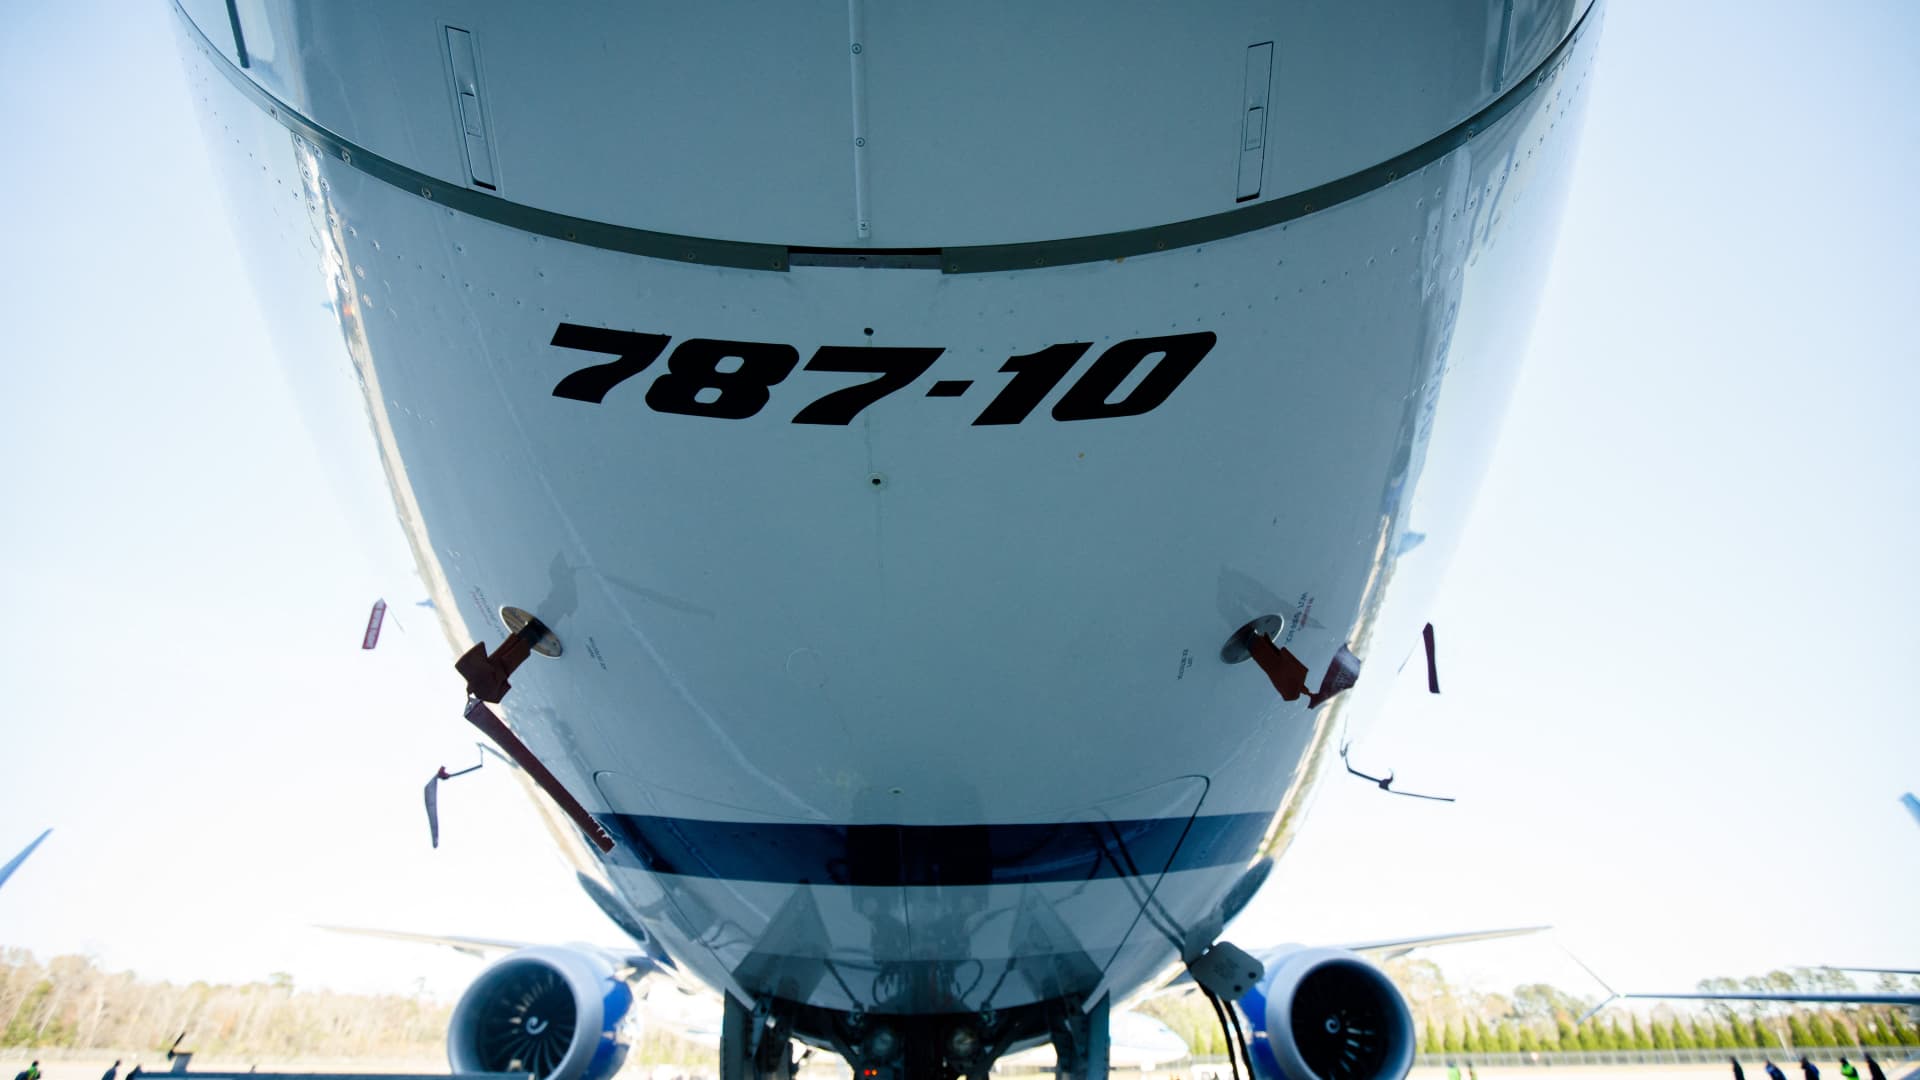 Boeing pauses delivery of 787 Dreamliners